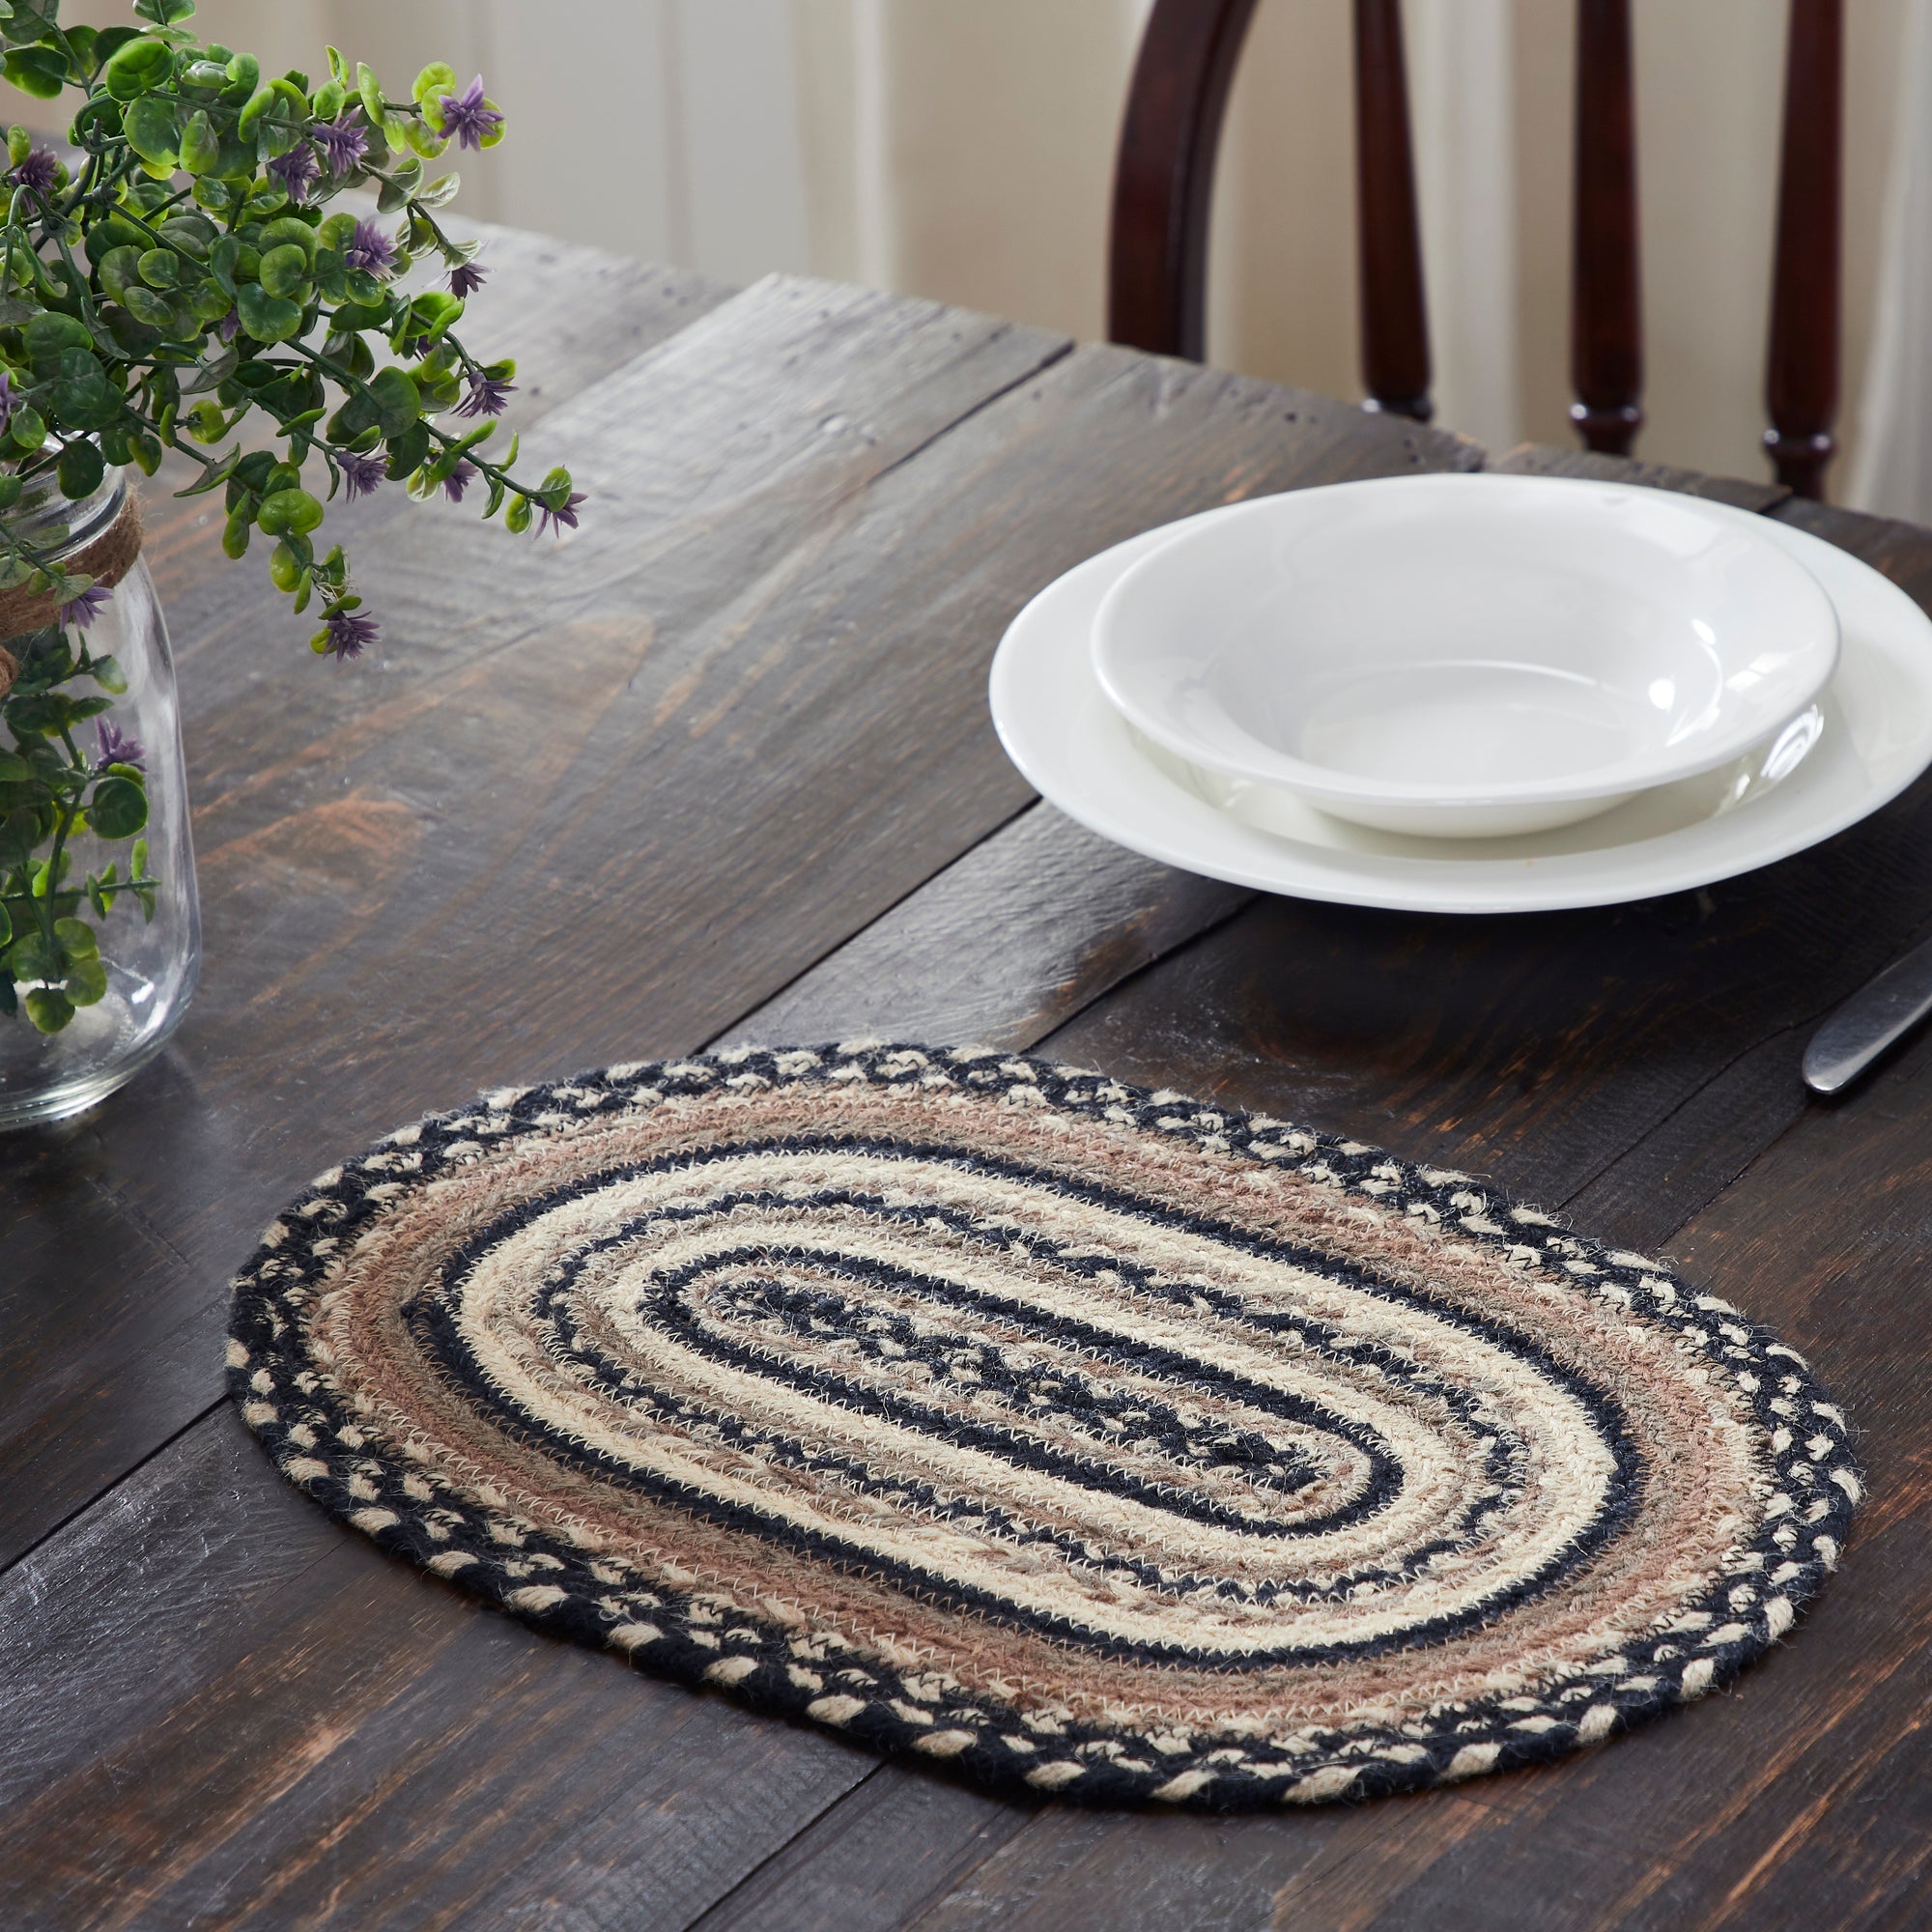 Sawyer Mill Charcoal Creme Jute Braided Oval Placemat 10"x15" VHC Brands